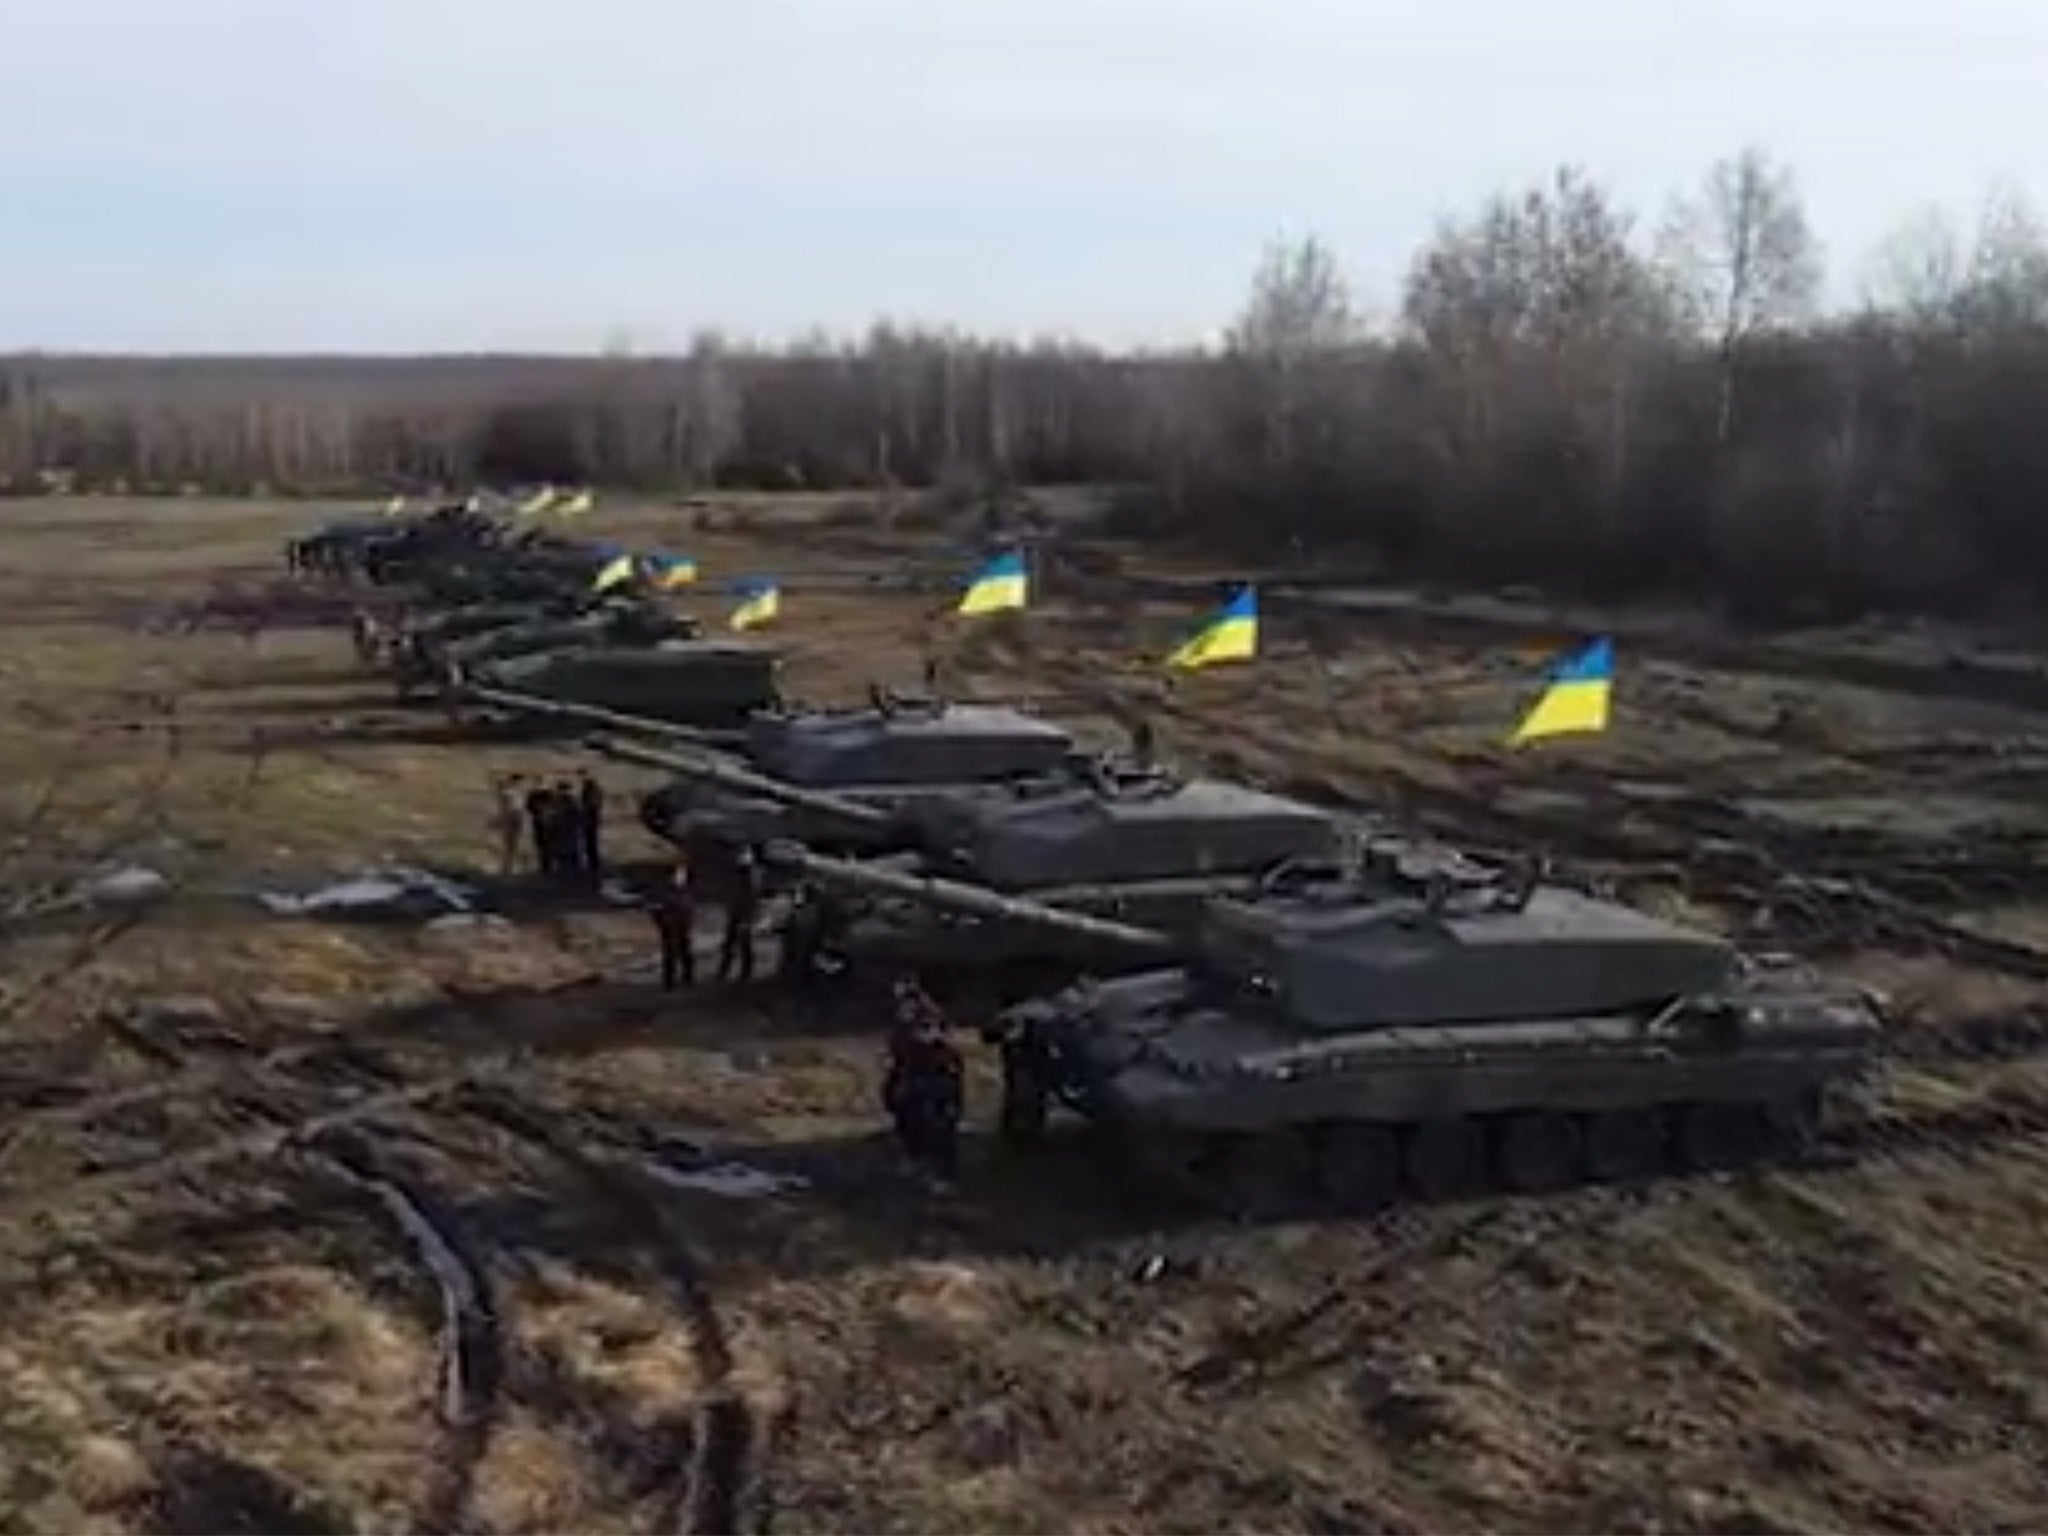 British tanks expected to arrive in Ukraine by March